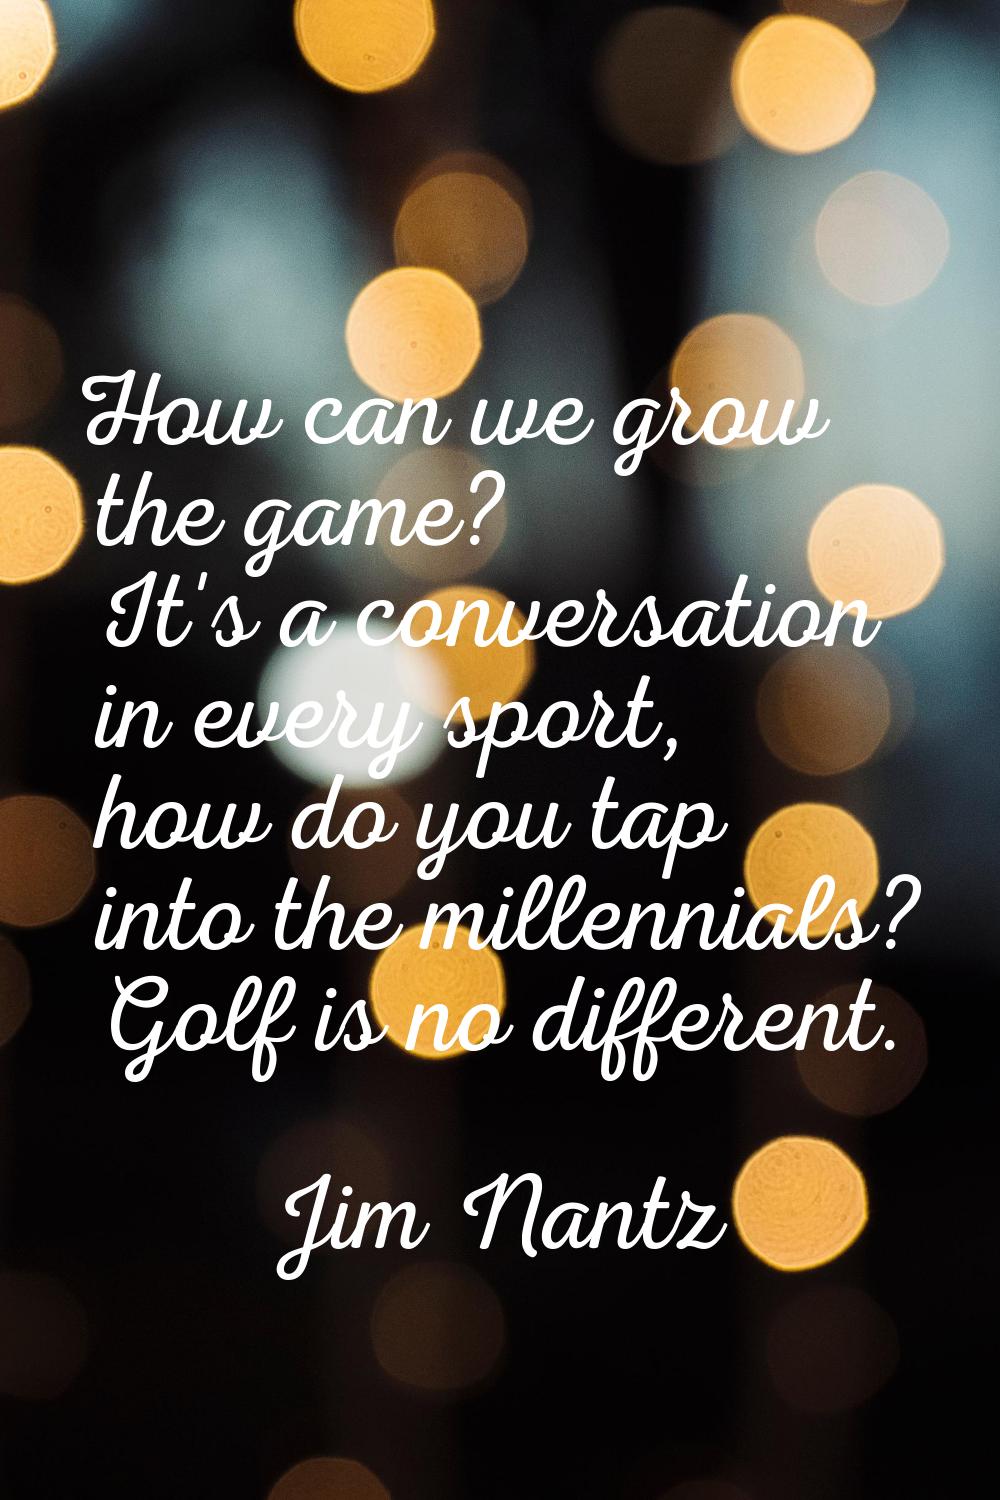 How can we grow the game? It's a conversation in every sport, how do you tap into the millennials? 